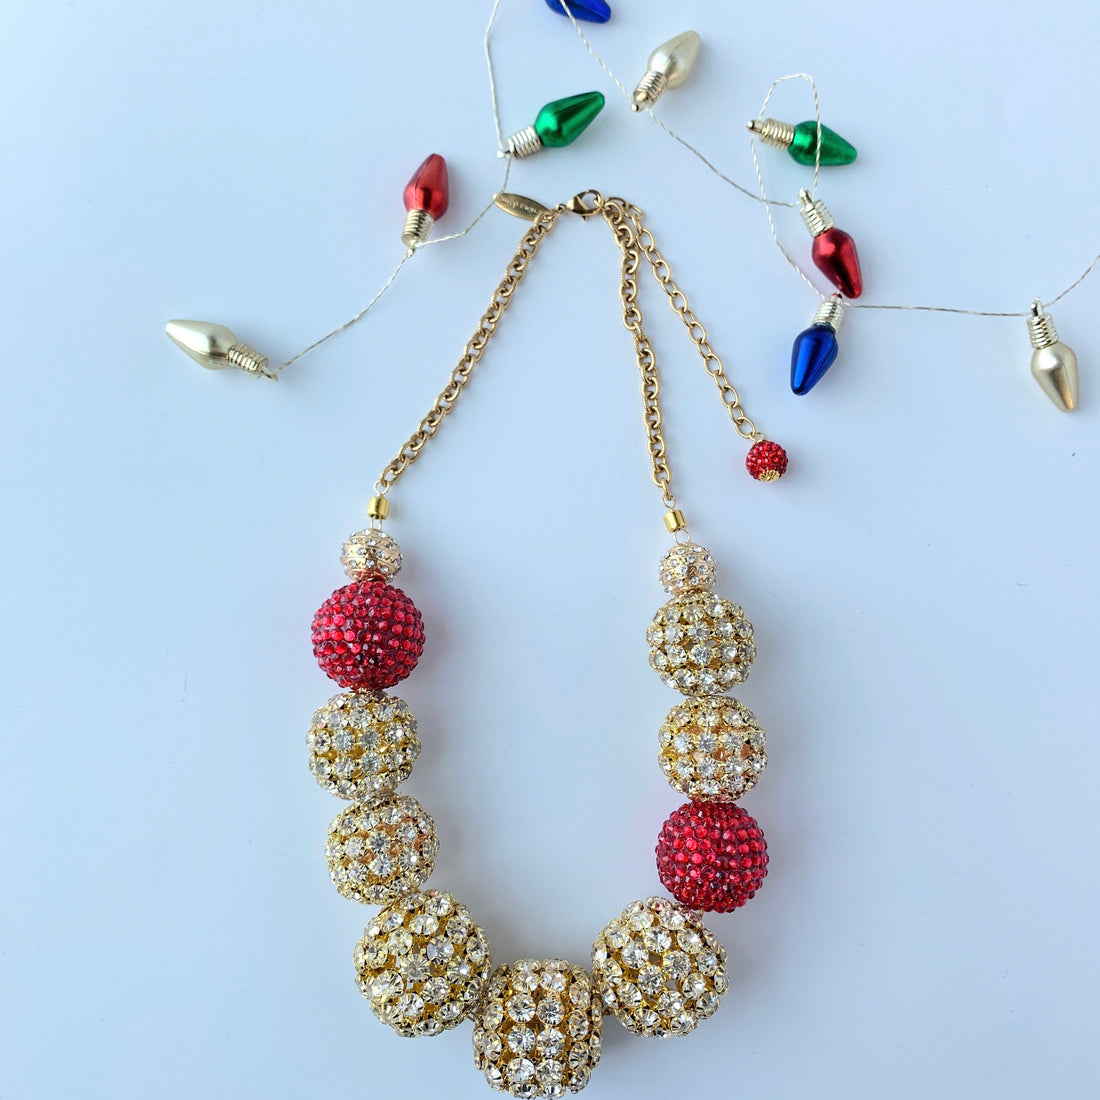 Lenora Dame Holiday Bling Bling Statement Necklace